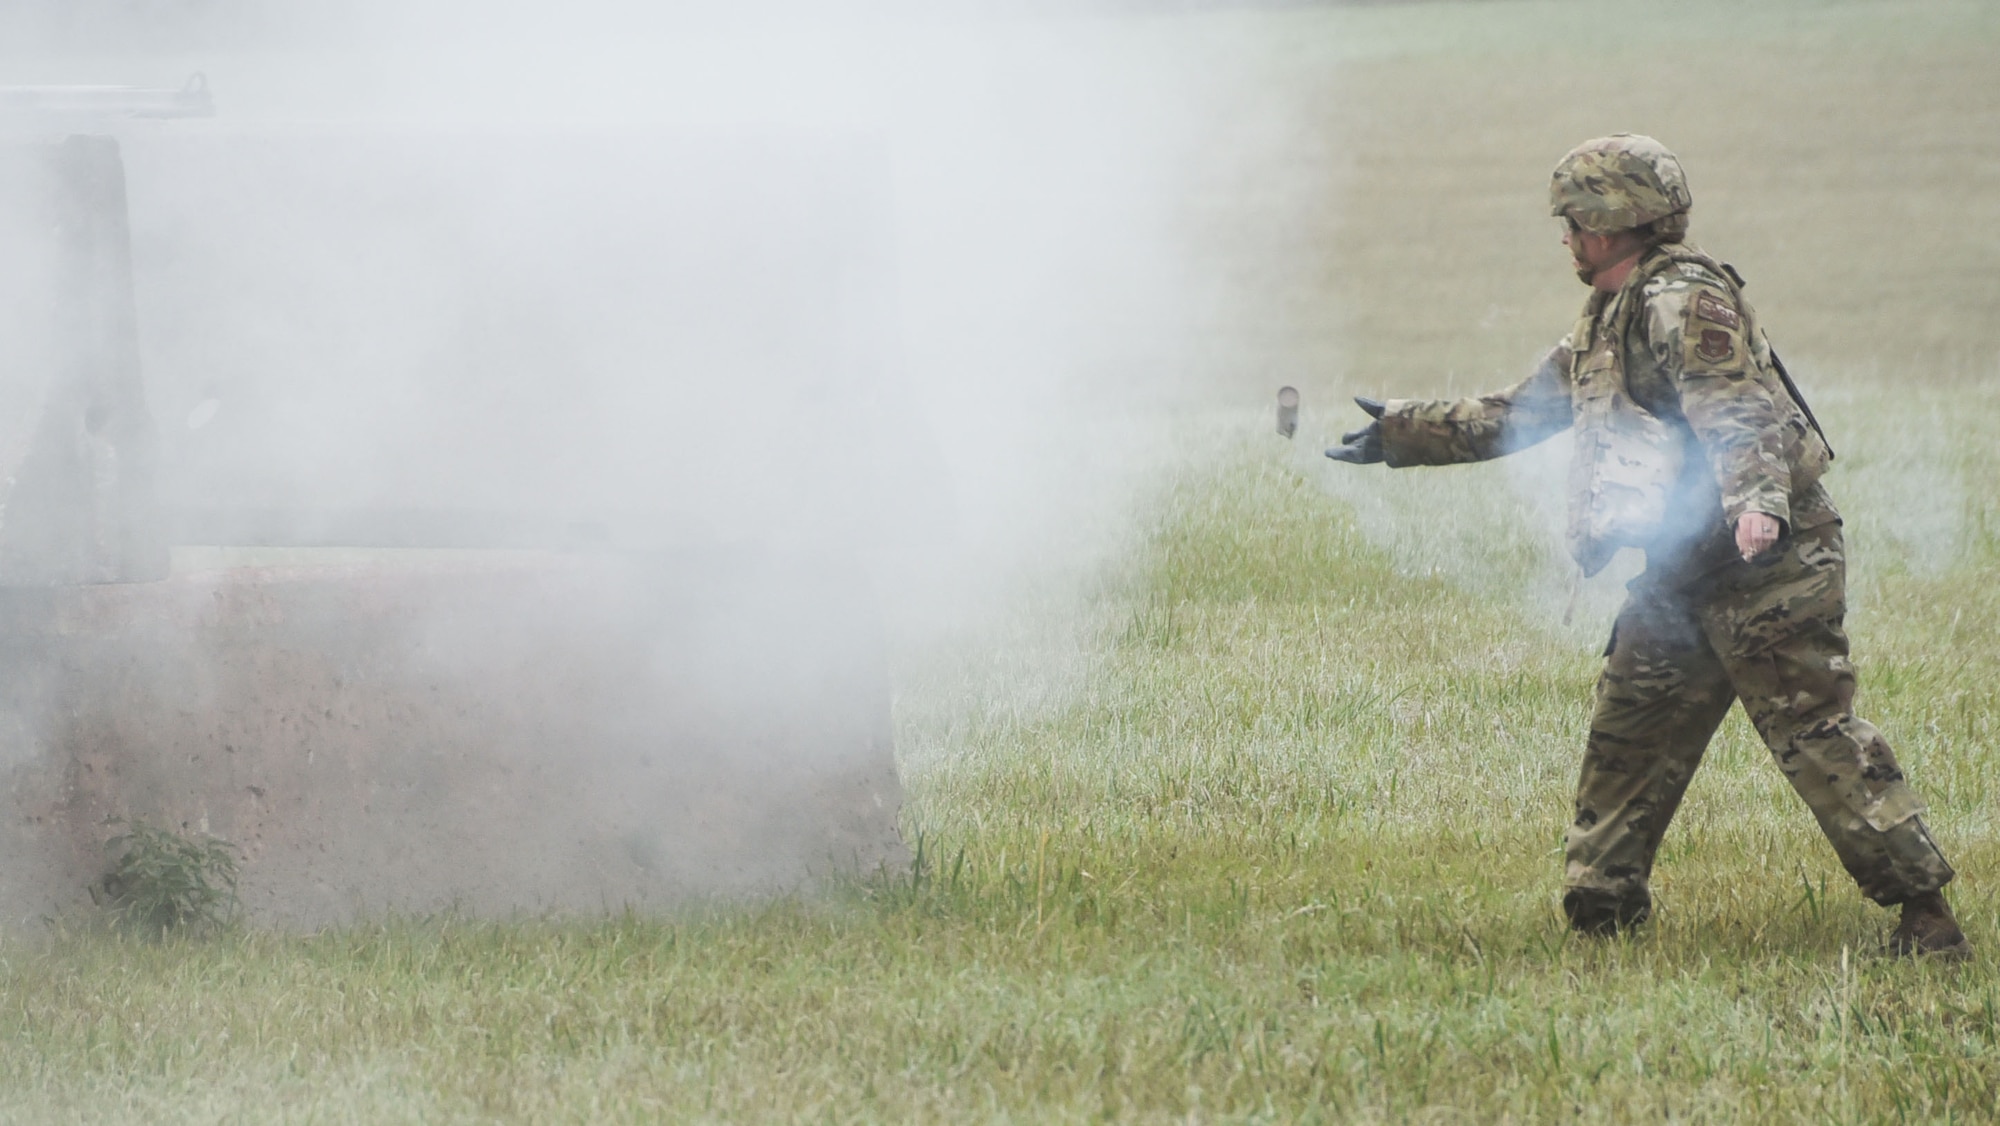 Master Sgt. Stacey Botzet, 931st Civil Engineer Squadron program manager, throws a ground burst simulator as part of a three-day 931st Air Refueling Wing operational readiness exercise Sept. 12, 2020, at McConnell Air Force Base, Kan.  The GBS’s were to simulate smoke after an attack, to evaluate 931st ARW’s Airmen’s ability to respond after an explosives attack.